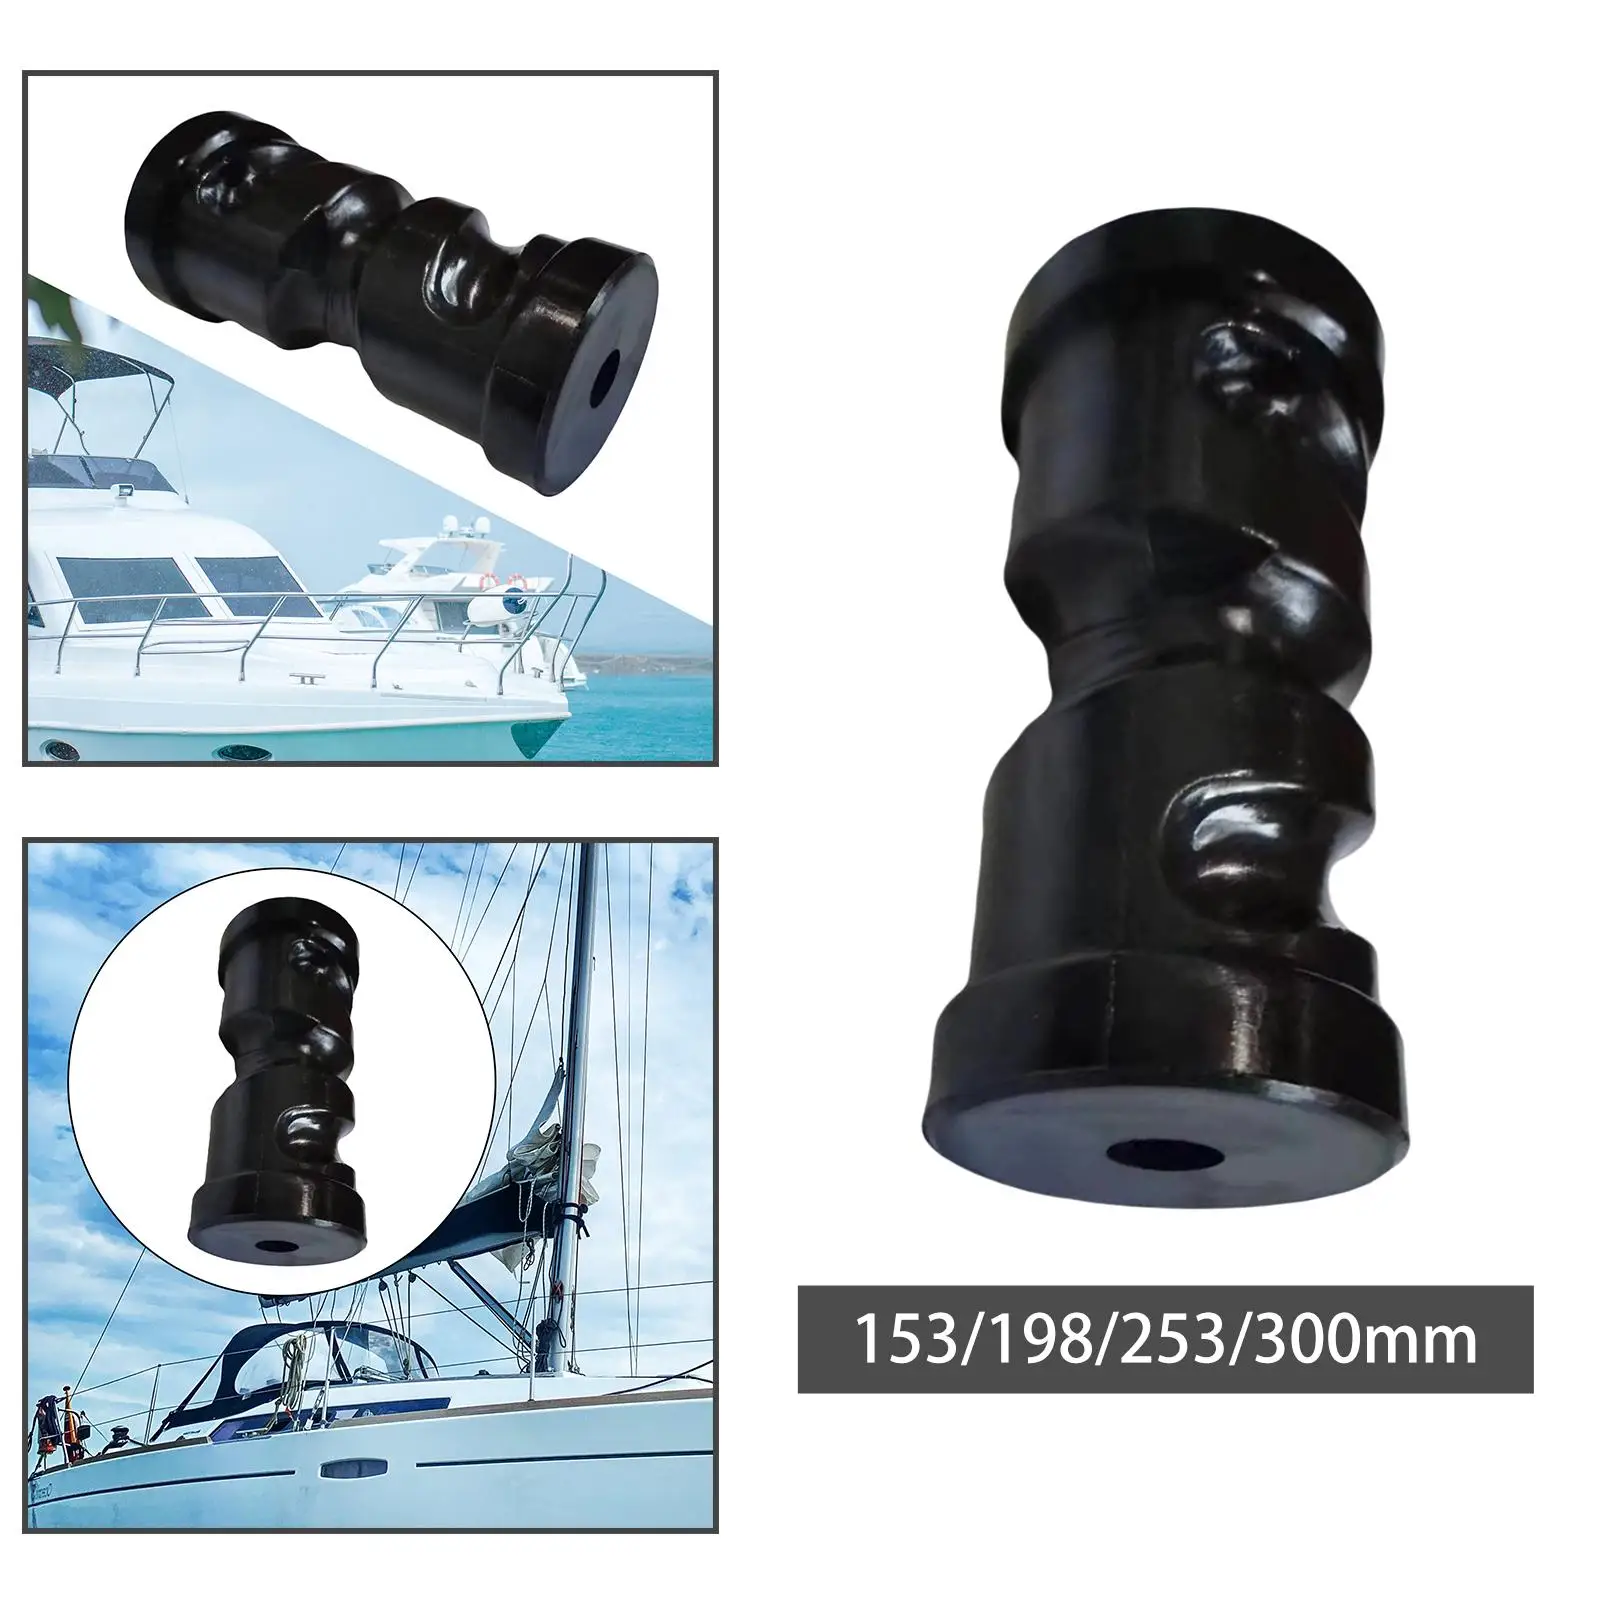 Marine Keel Roller Parts Modification for Replacement Premium Easily Install